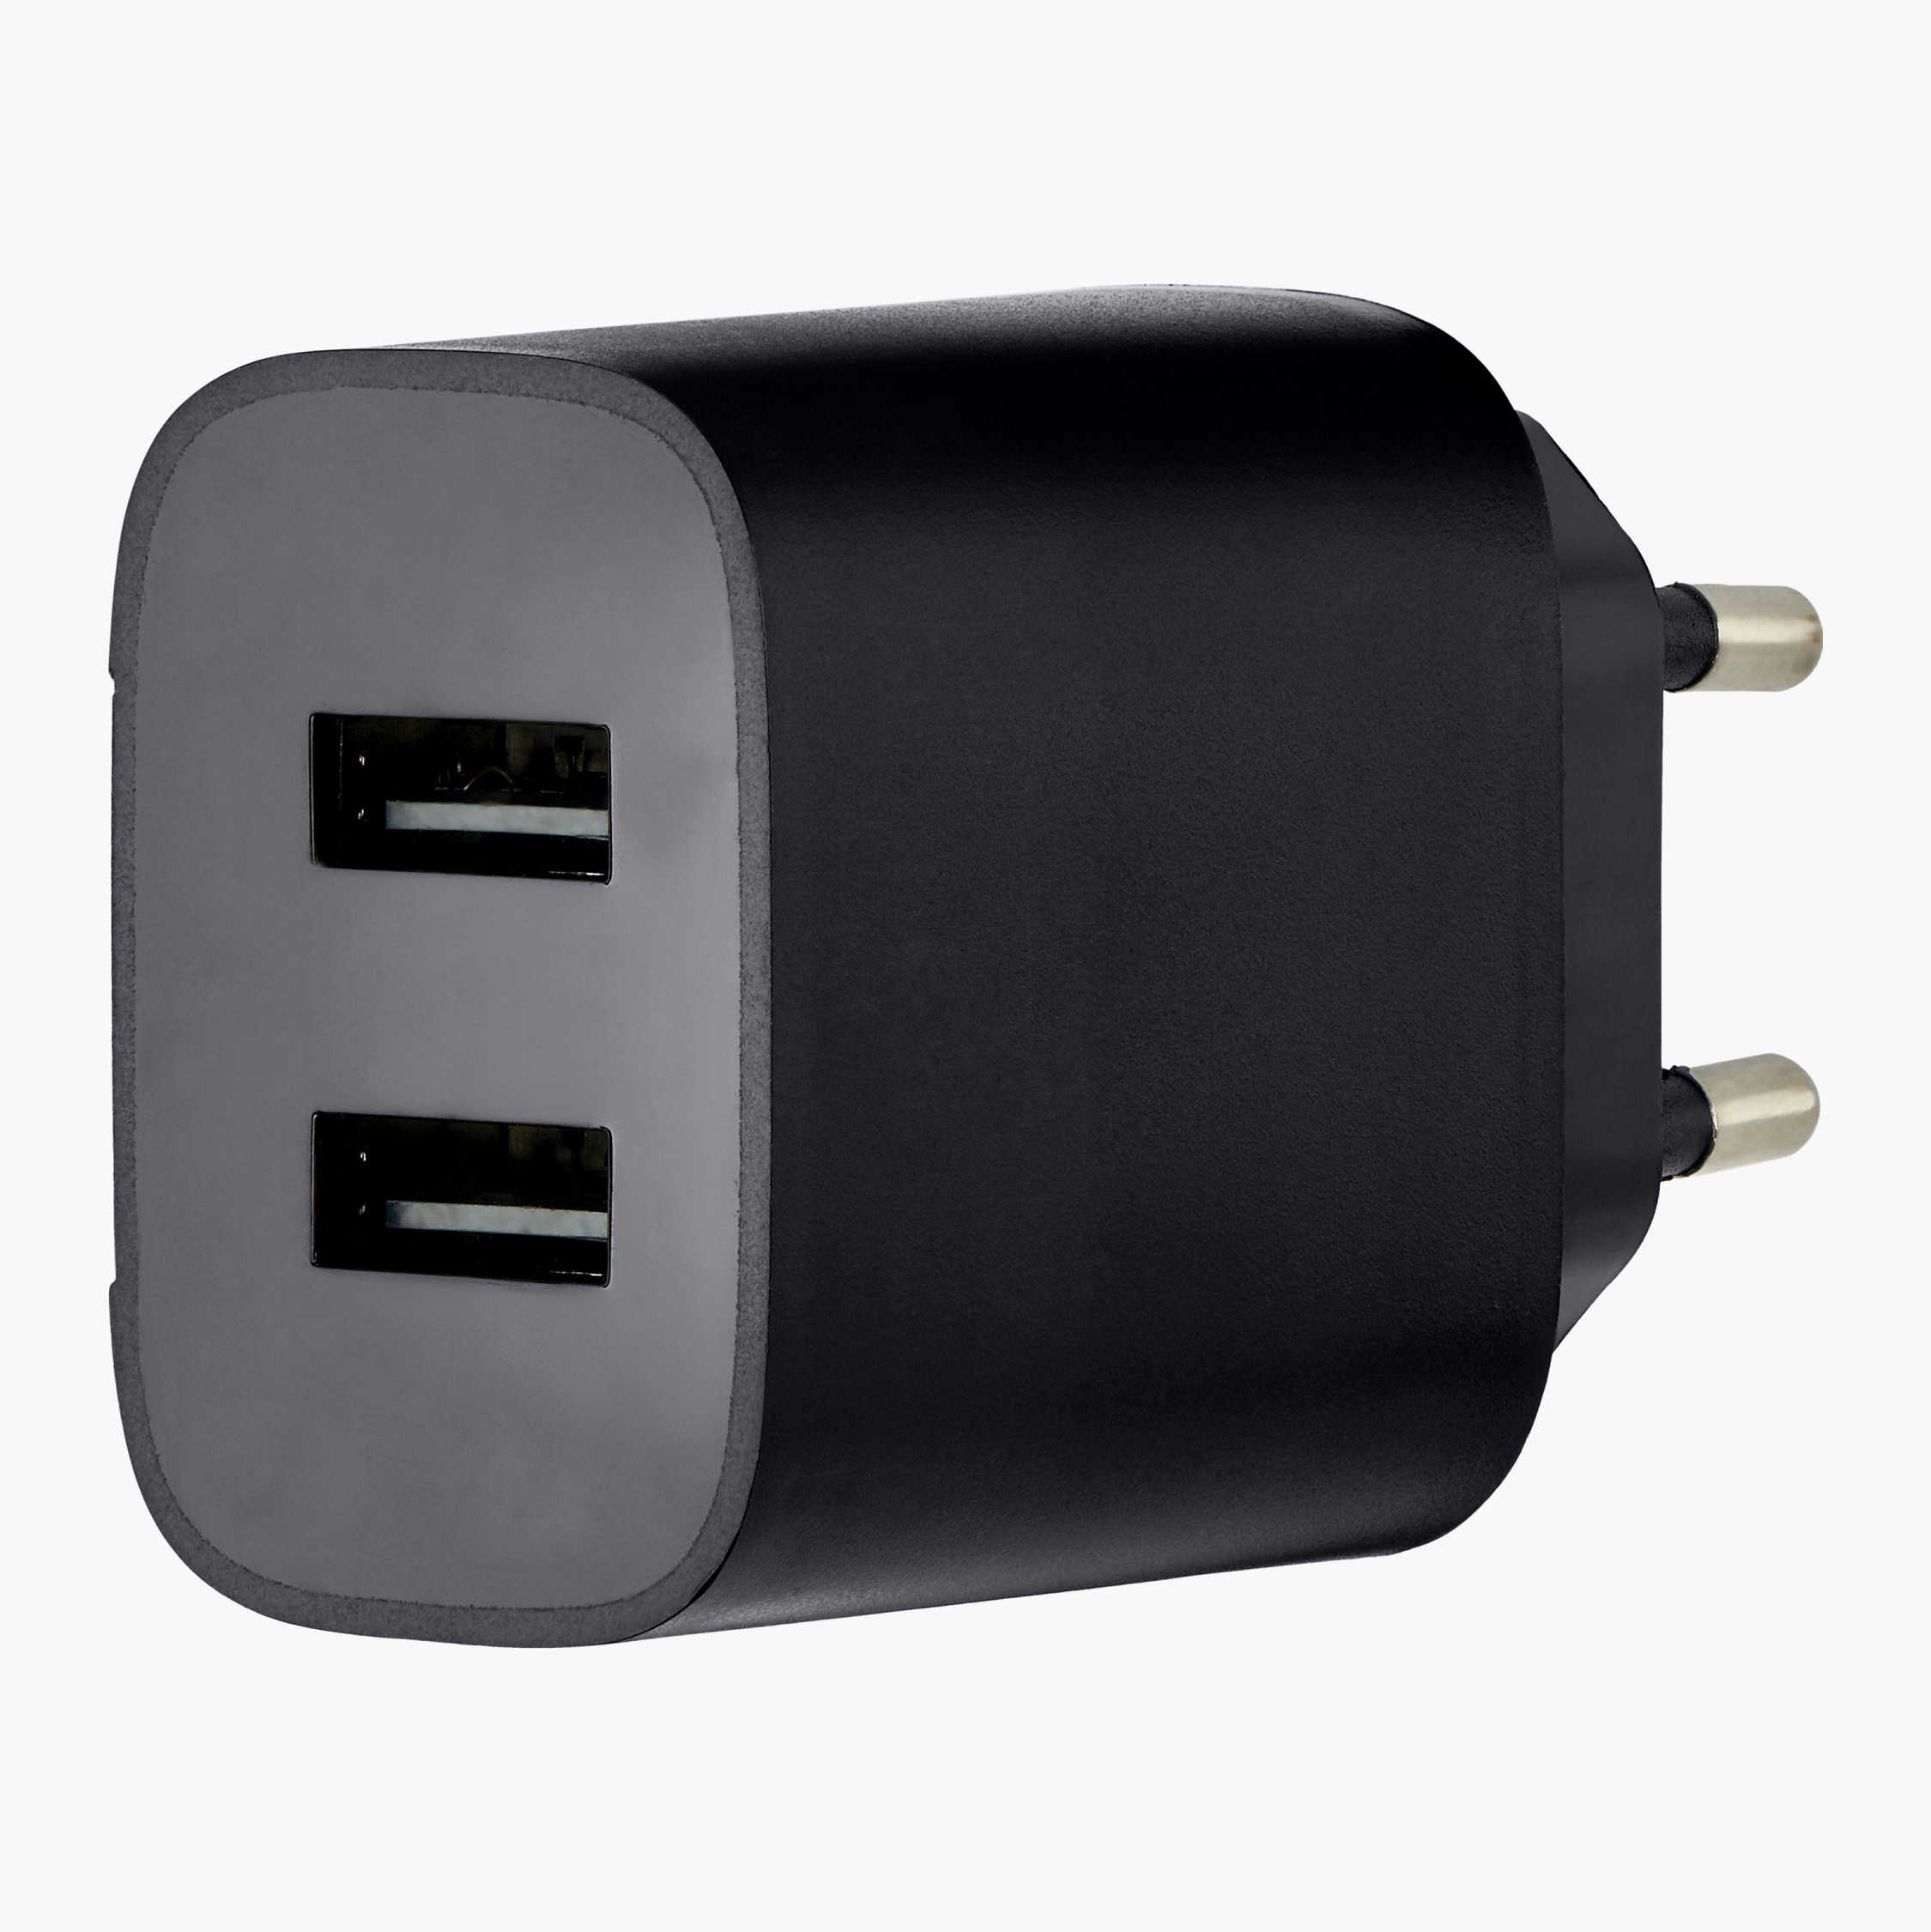 USB charger with 2 ports, Type A, 2.4 A - Biltema.no